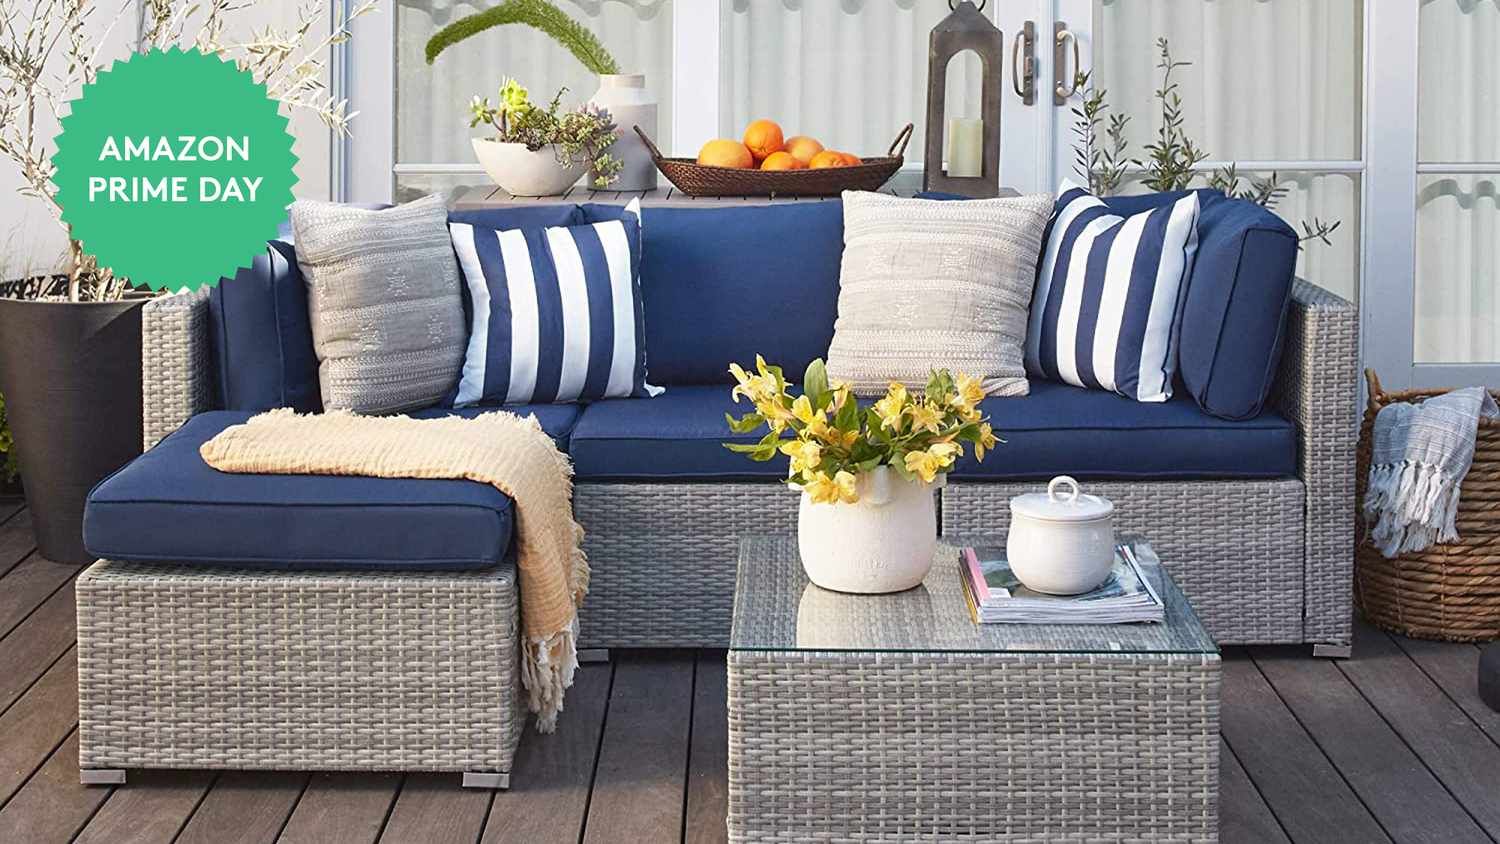 Epic Amazon Prime Day Patio Furniture Deals Up To 58% Off Intended For 5 Piece Patio Furniture Set (View 10 of 15)